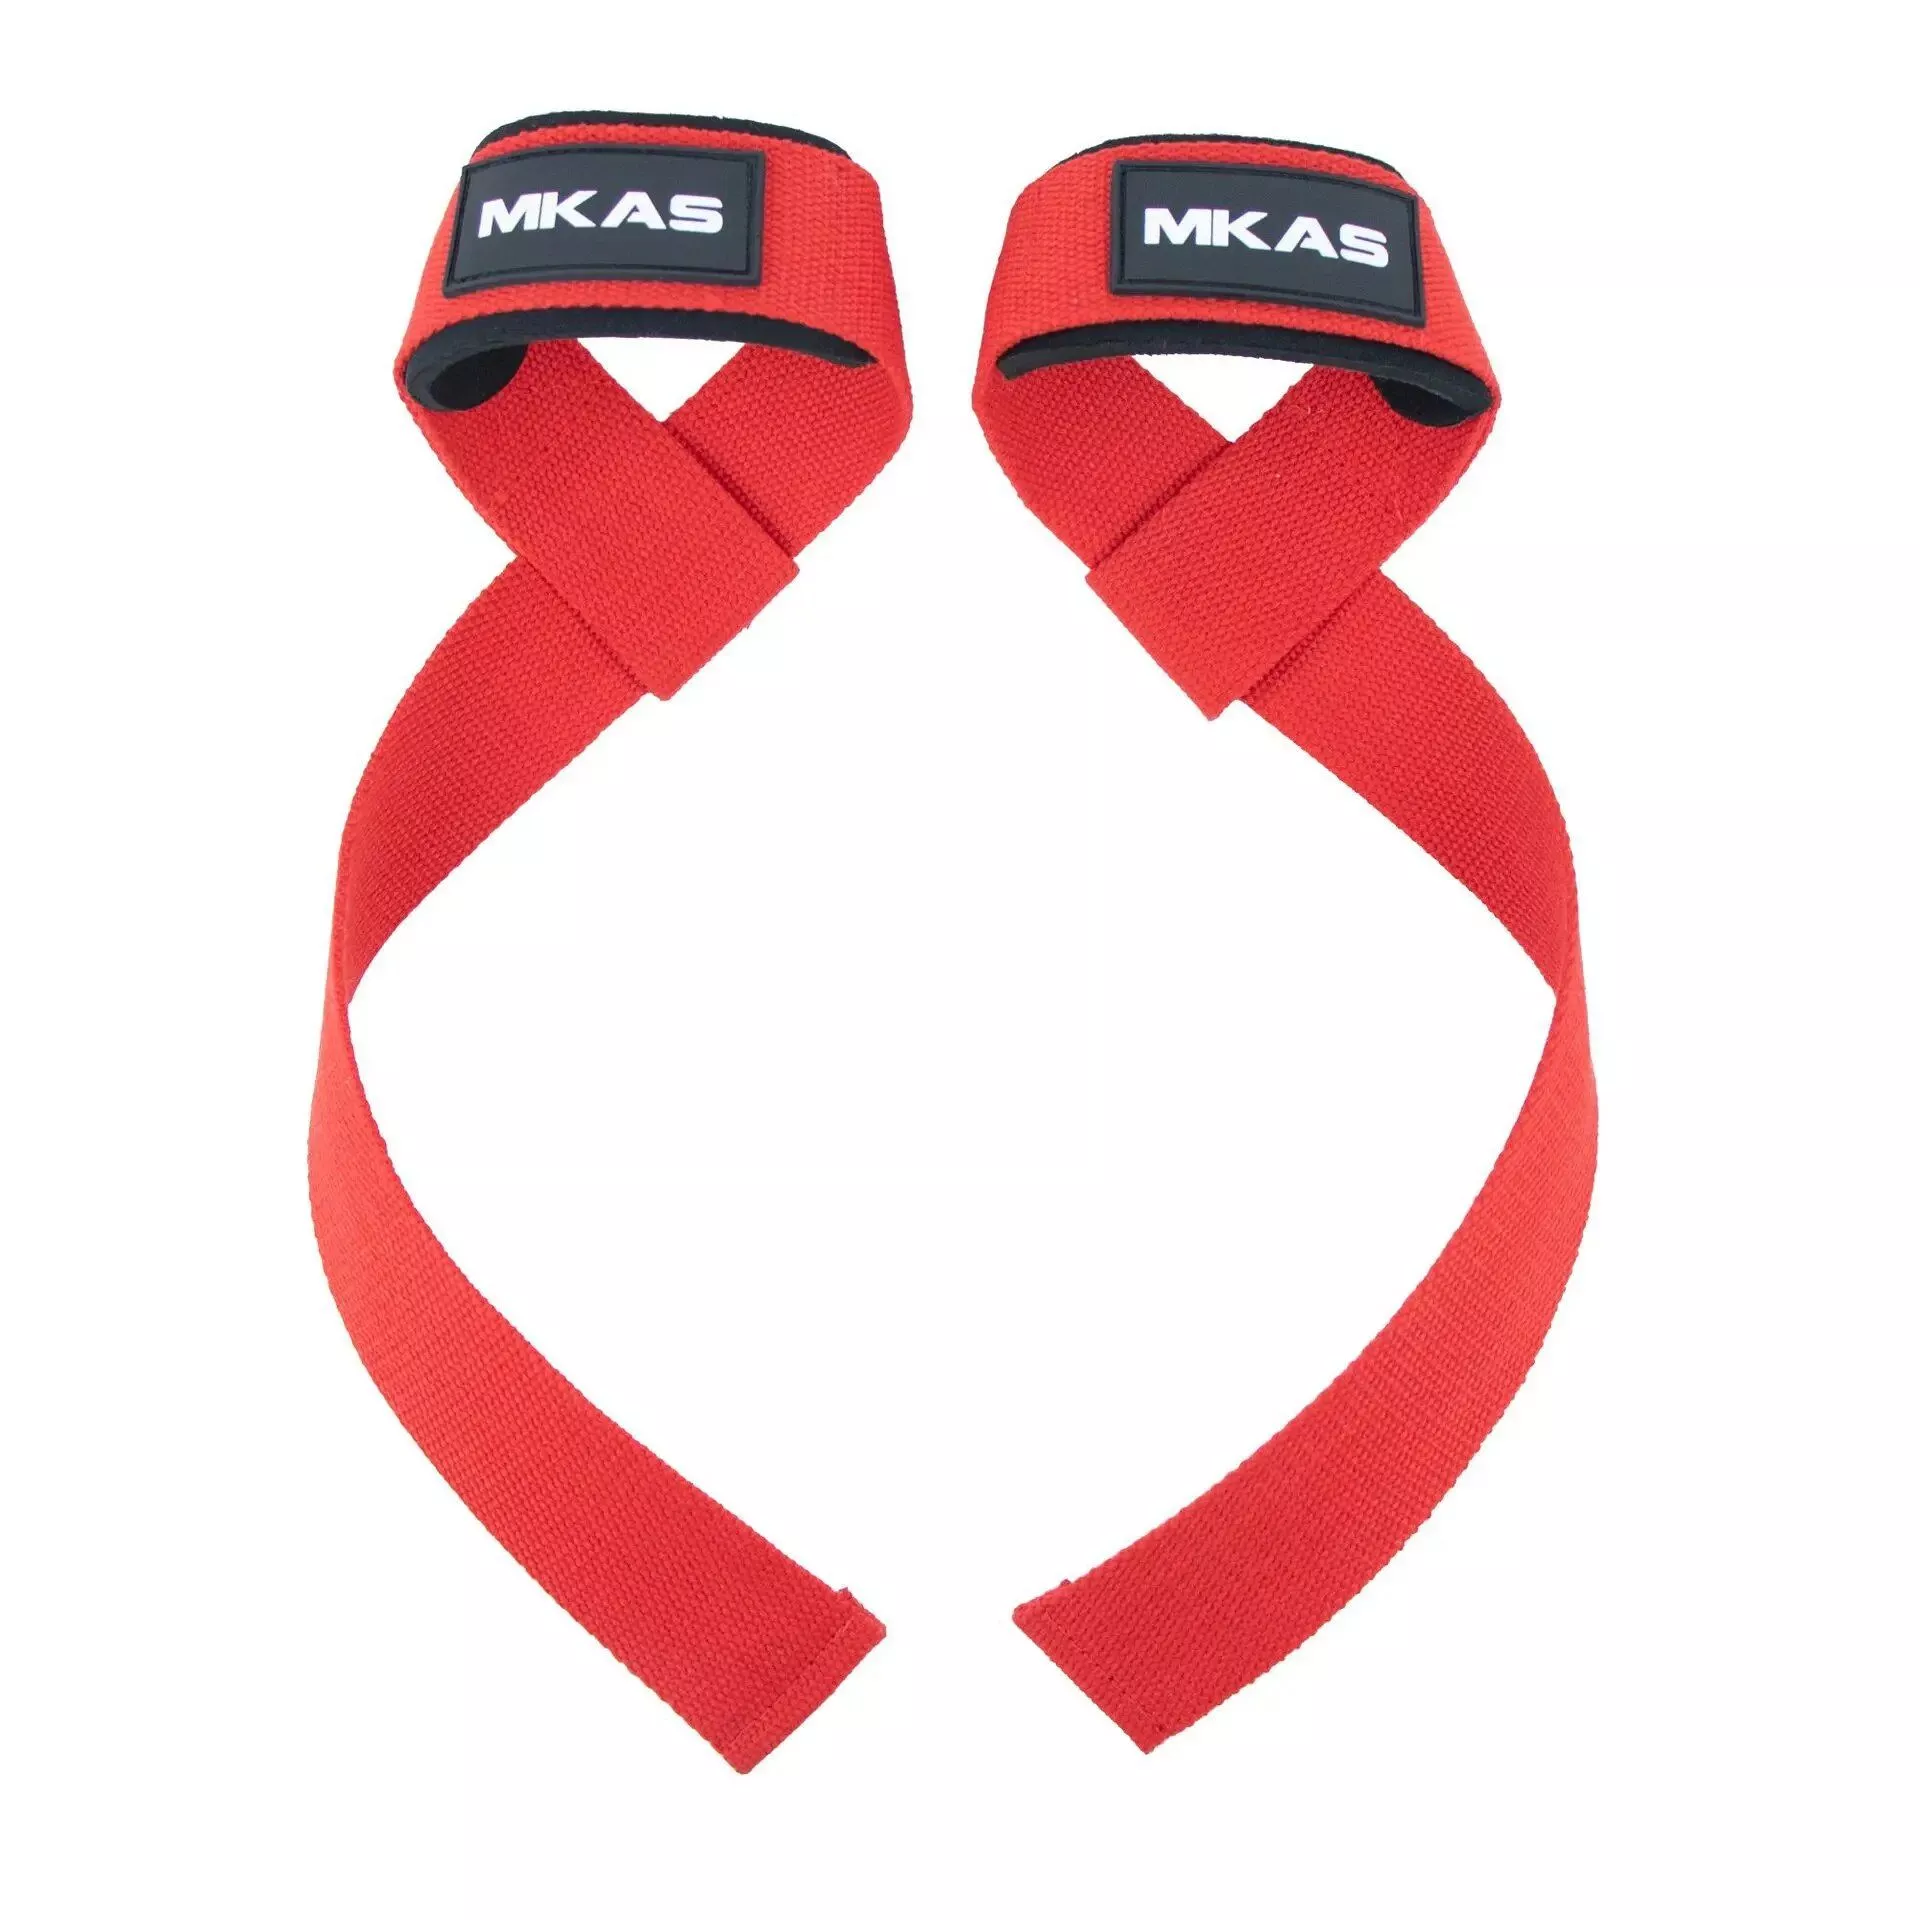 Non-Slip Gel Grip Weight Lifting Wrist Straps for Fitness and Bodybuilding